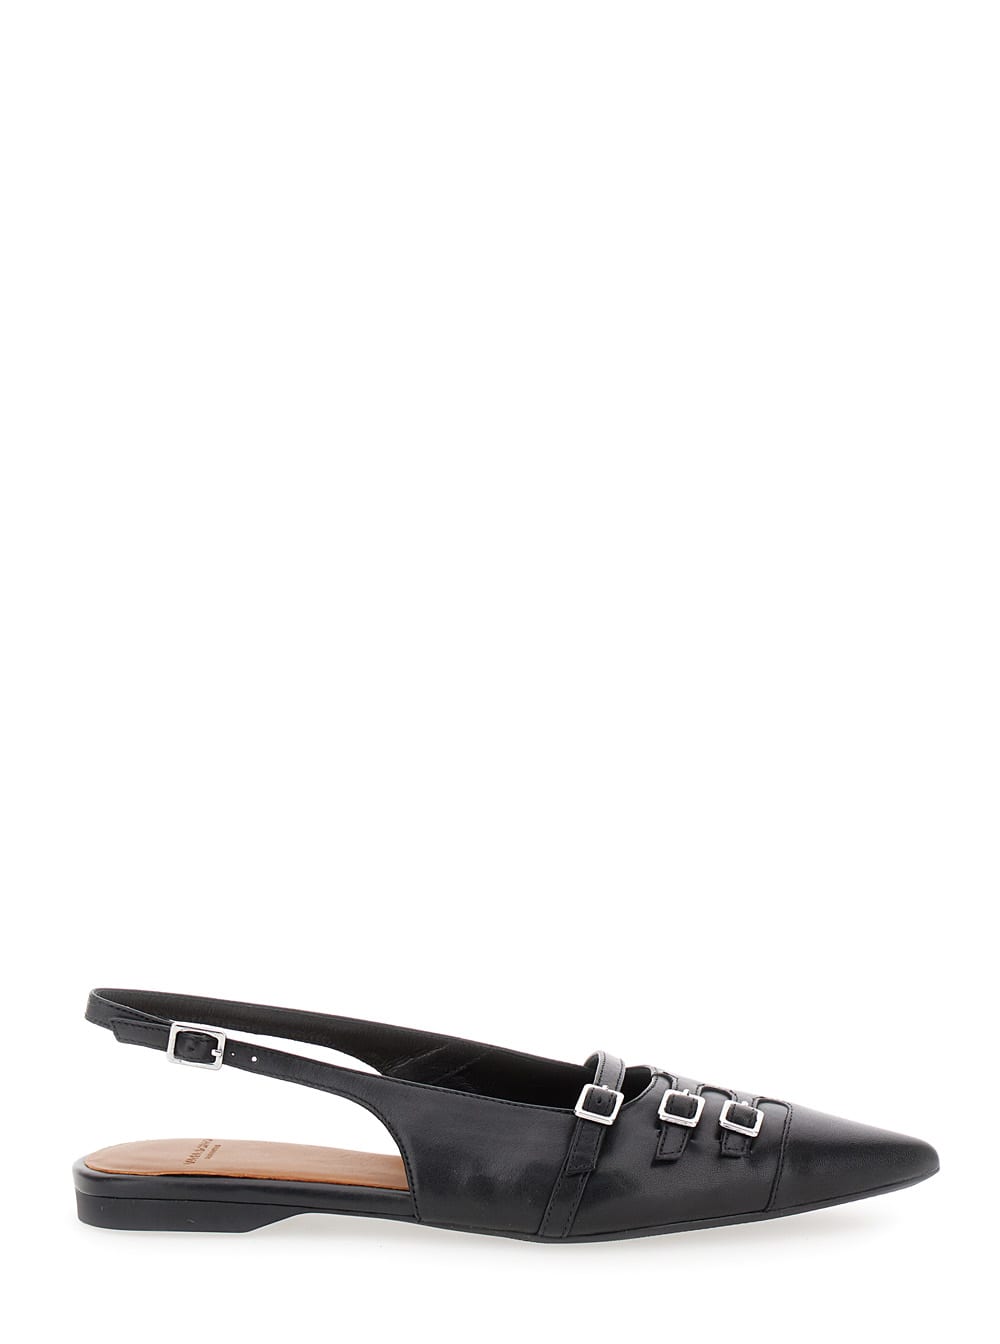 hermine Black Slingback Ballet Flats With Decorative Buckles In Leather Woman